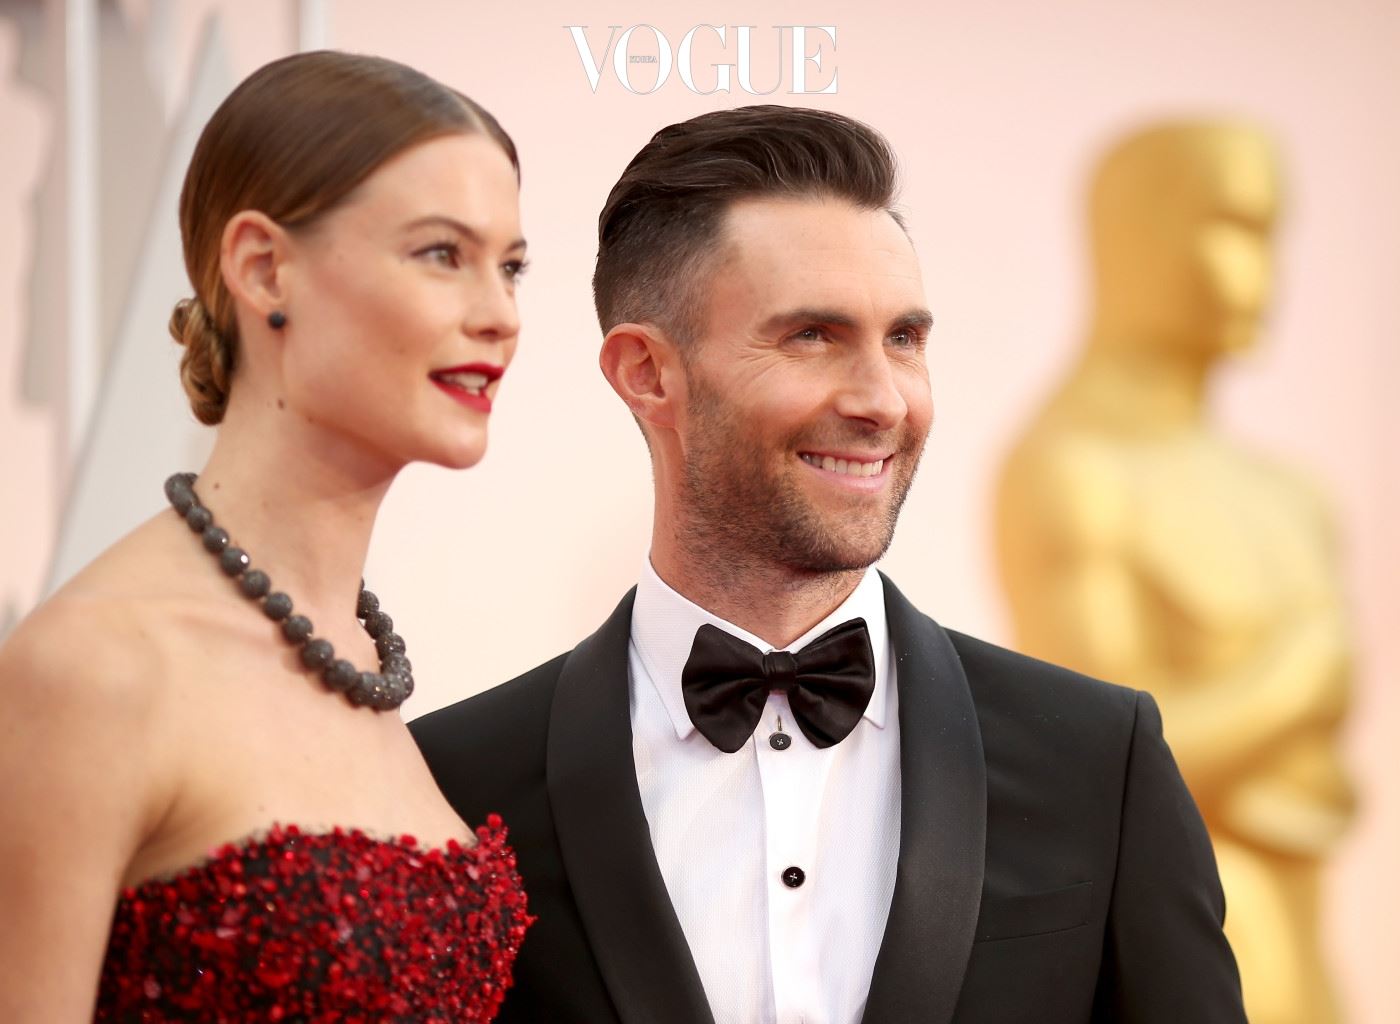 HOLLYWOOD, CA - FEBRUARY 22: Recording artist Adam Levine (R) and model Behati Prinsloo attend the 87th Annual Academy Awards at Hollywood & Highland Center on February 22, 2015 in Hollywood, California.  (Photo by Christopher Polk/Getty Images)